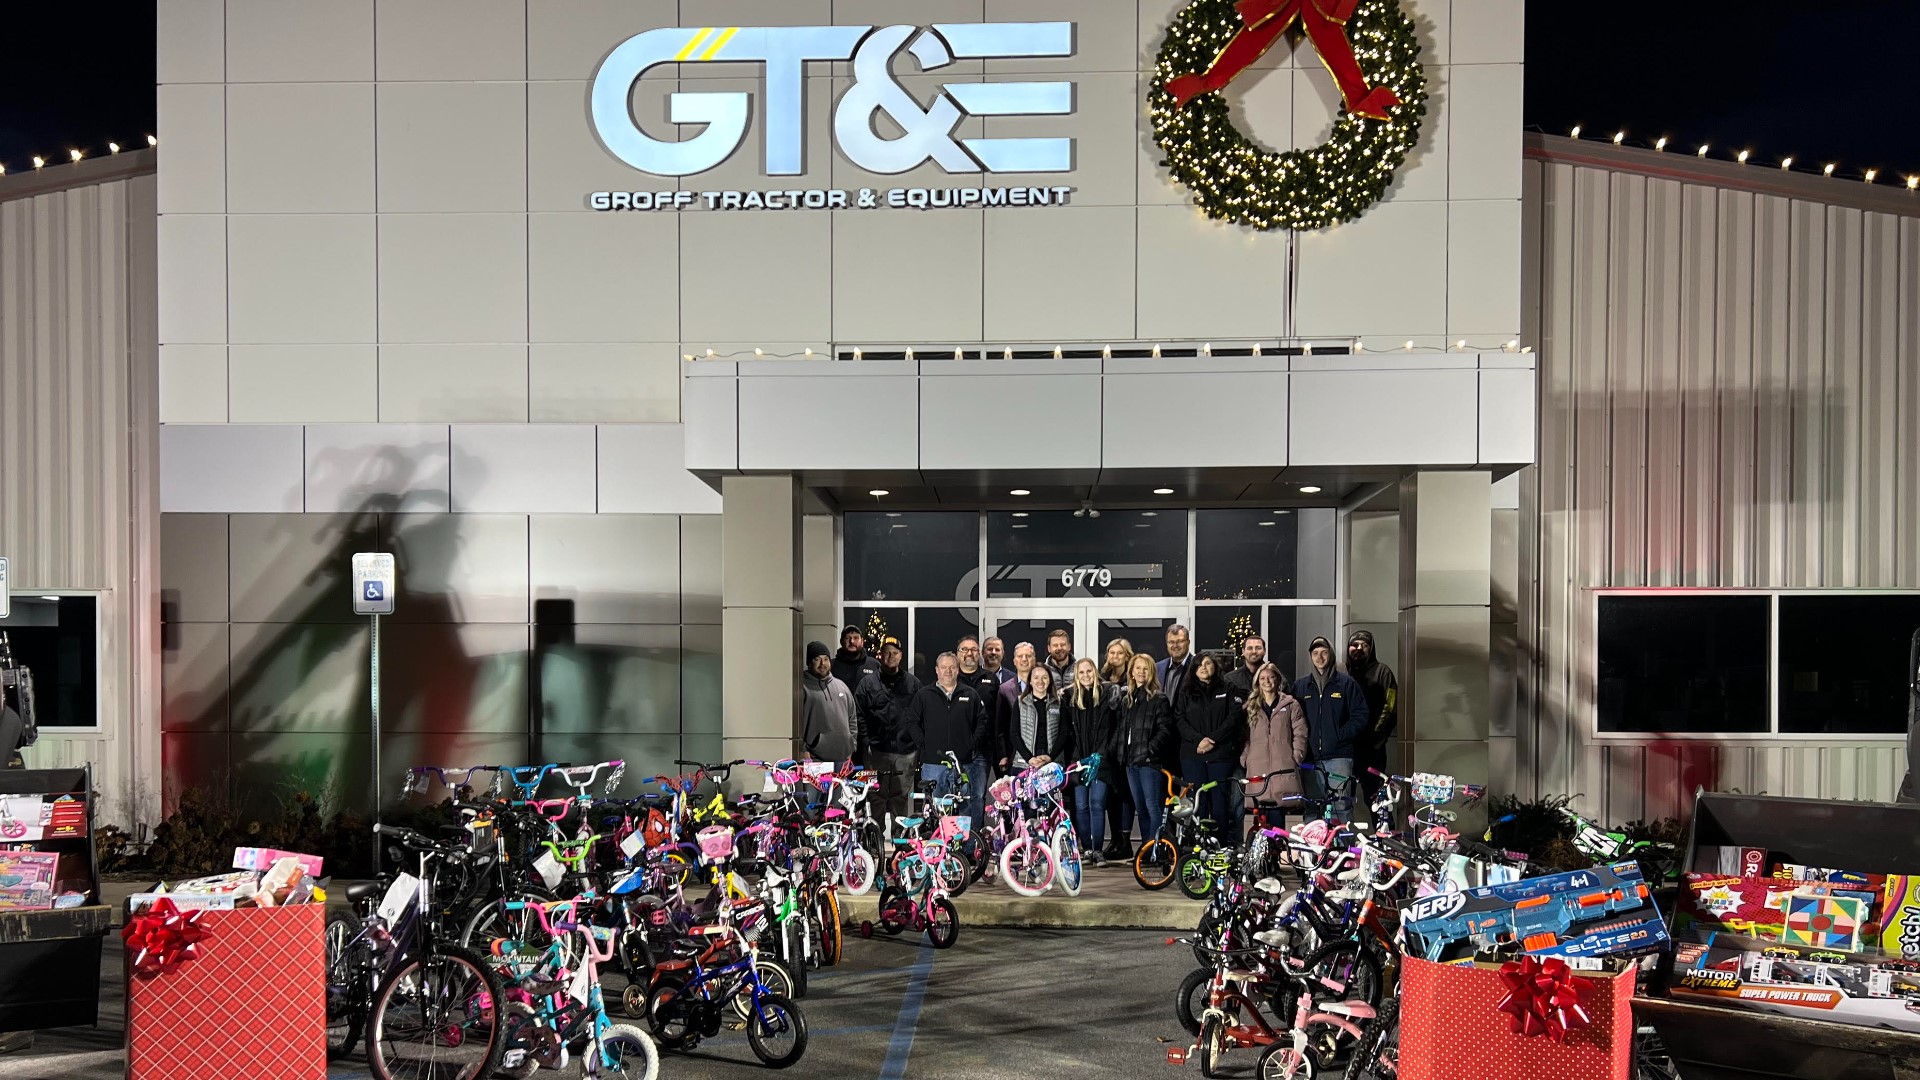 Groff Tractor & Equipment in Cumberland County collected unwrapped toys and bikes to give children this holiday season.